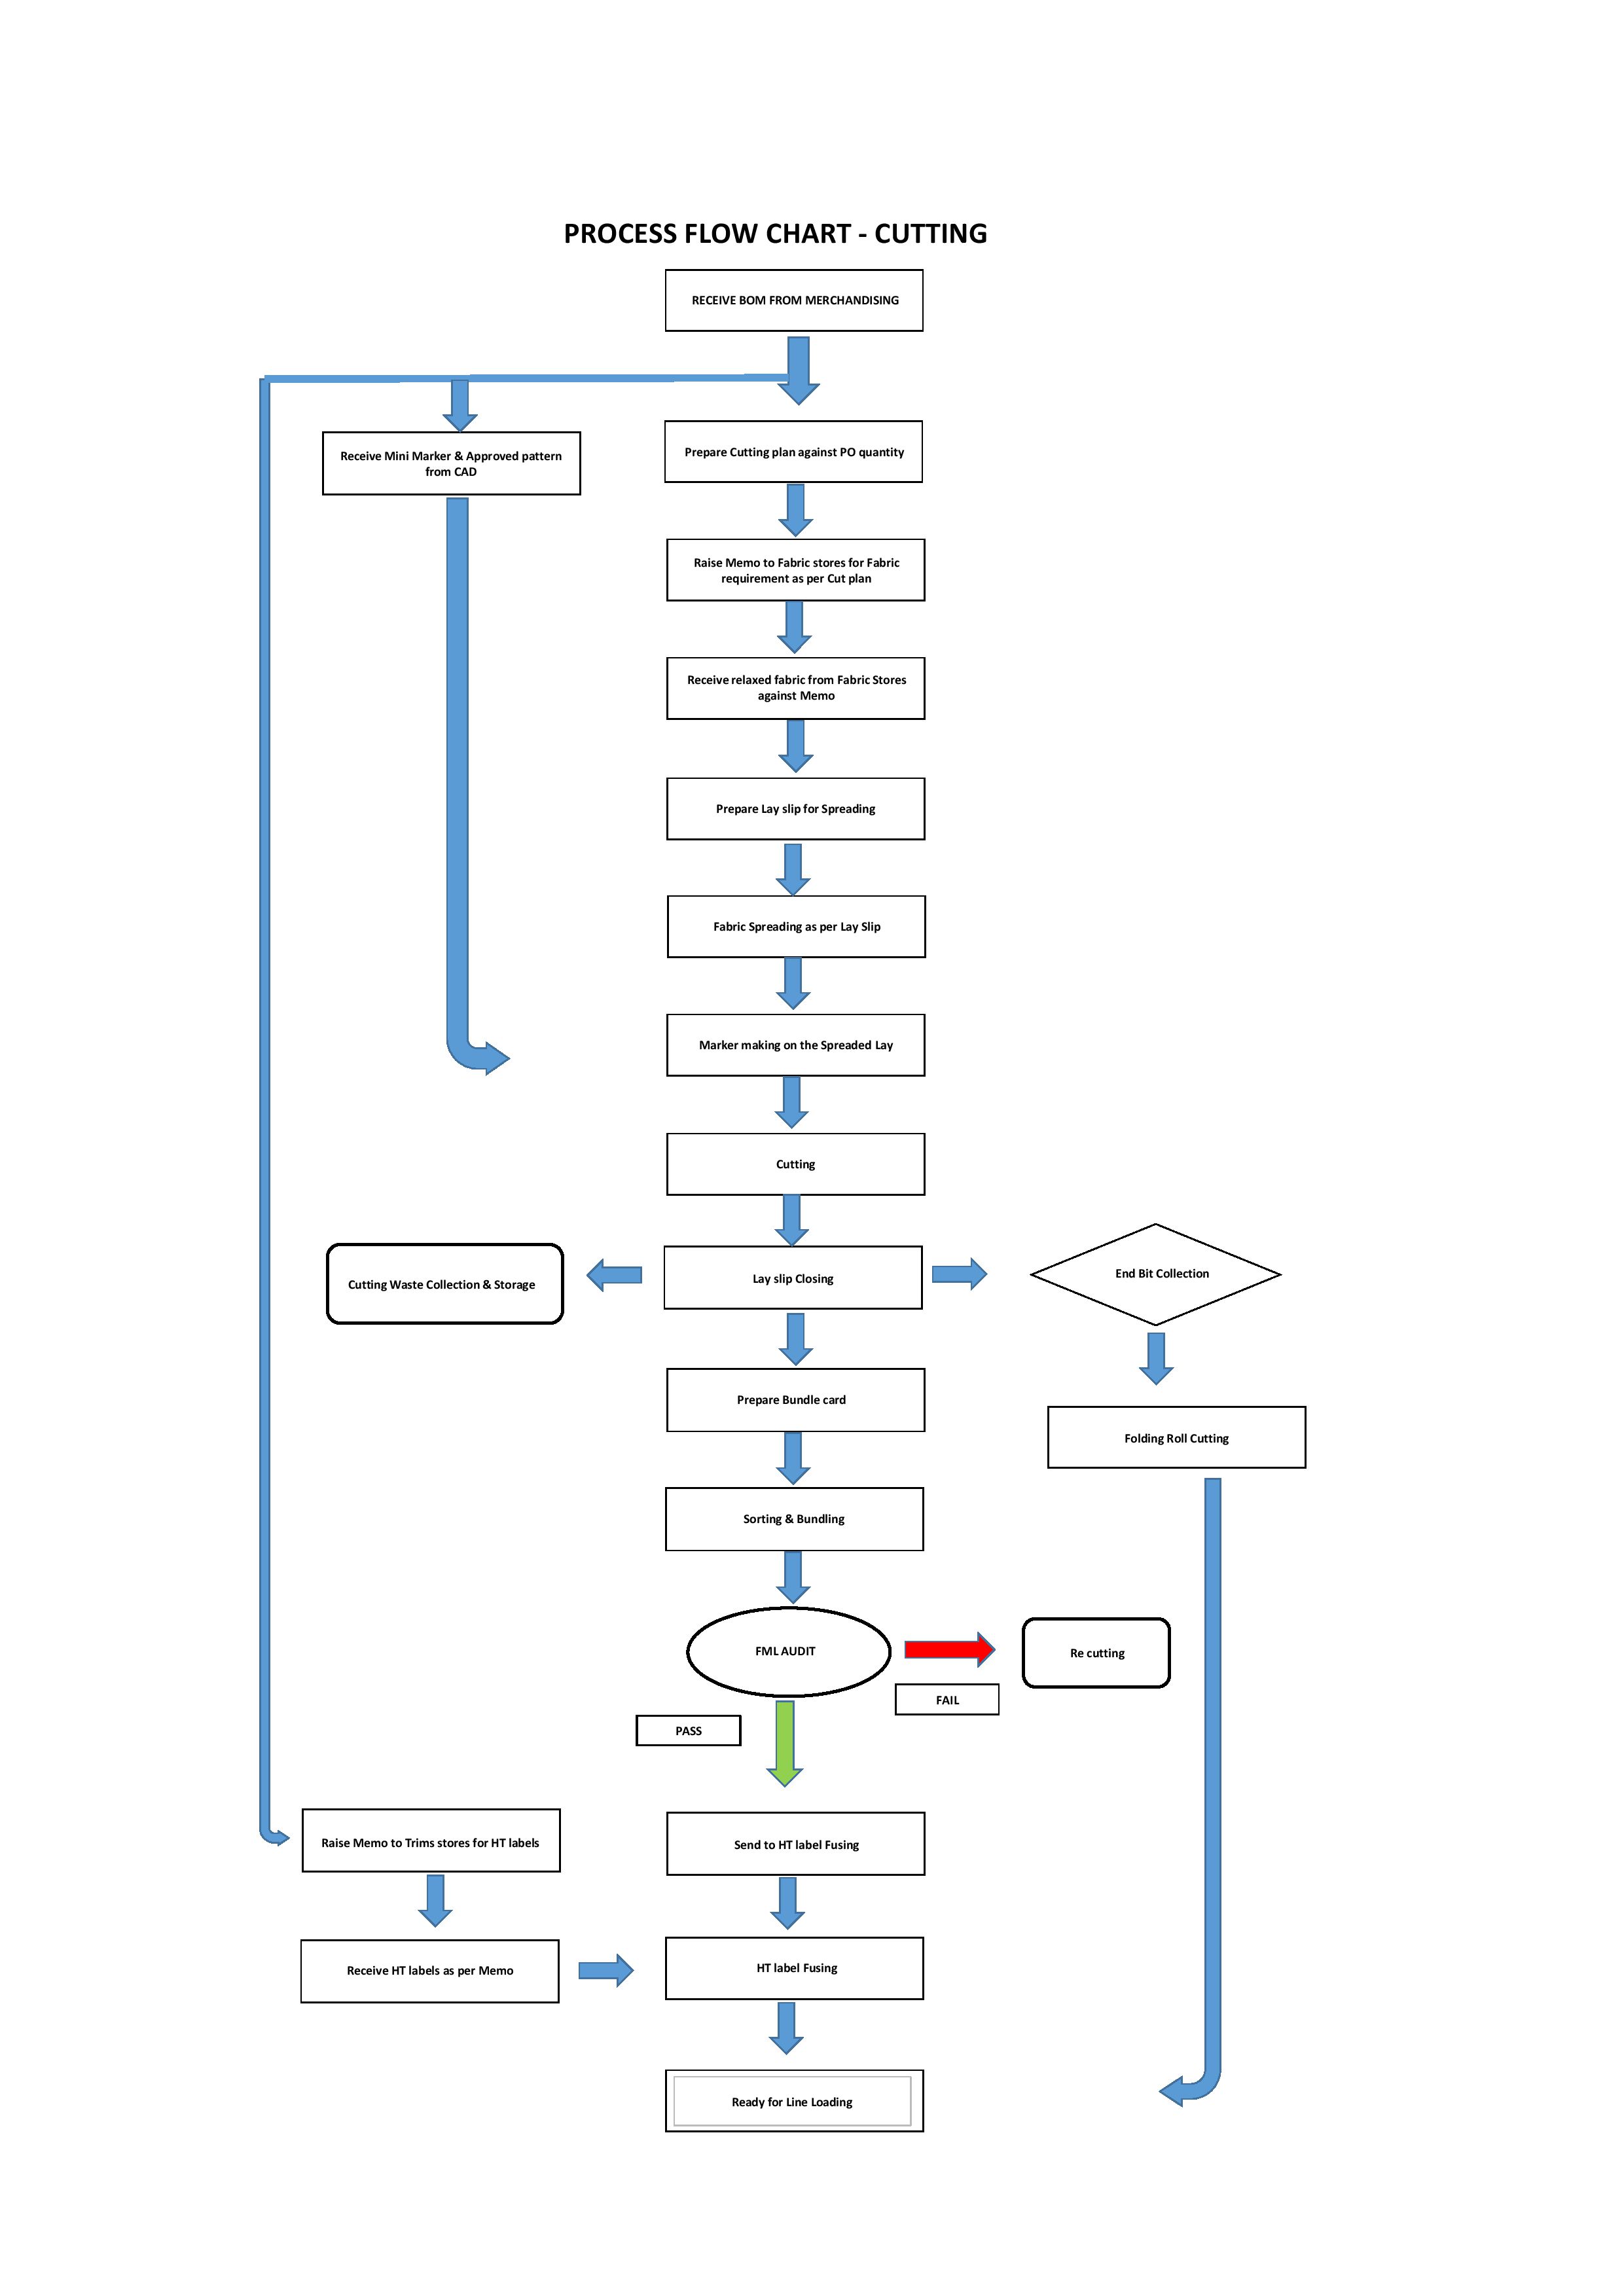 Processing Flow Chart : Cutting